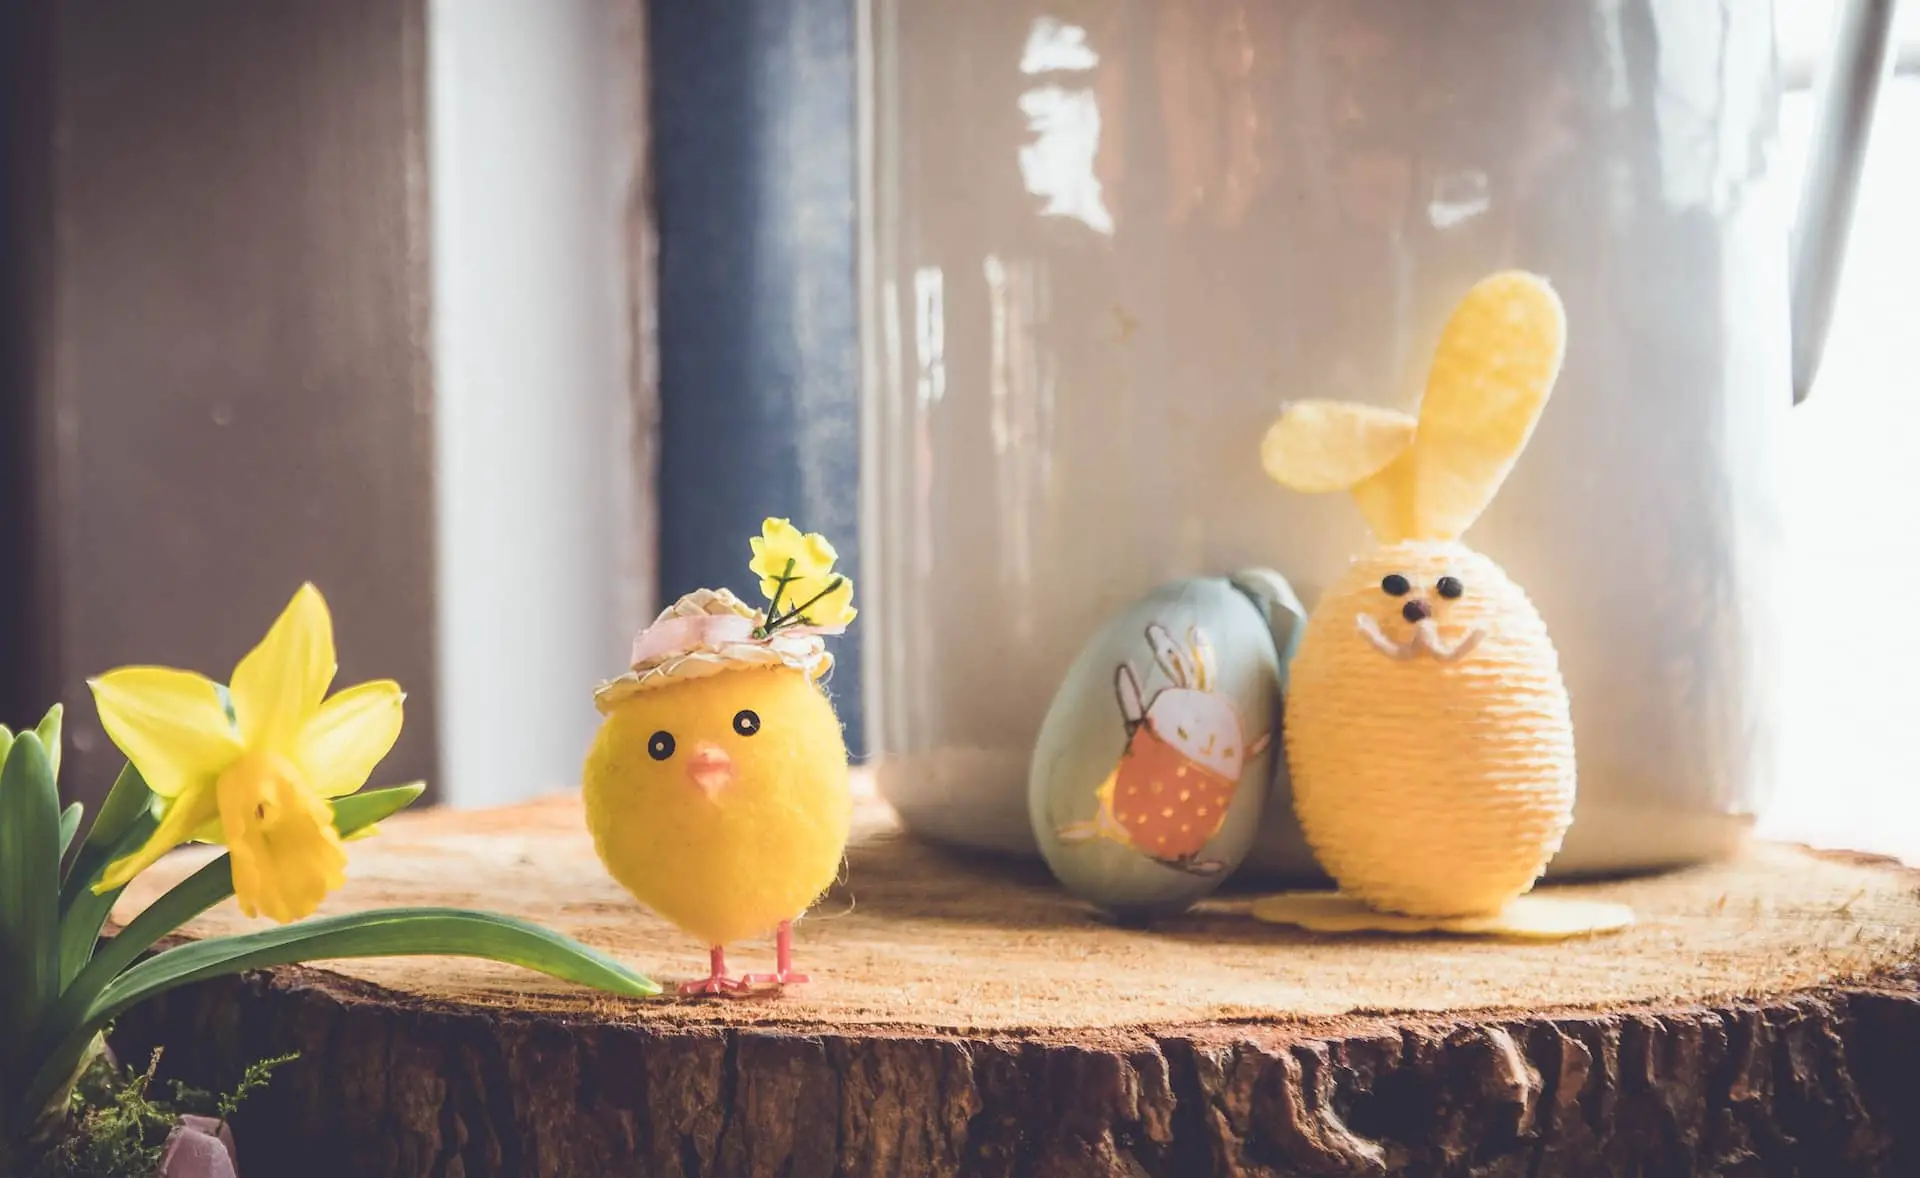 easter chick and eggs